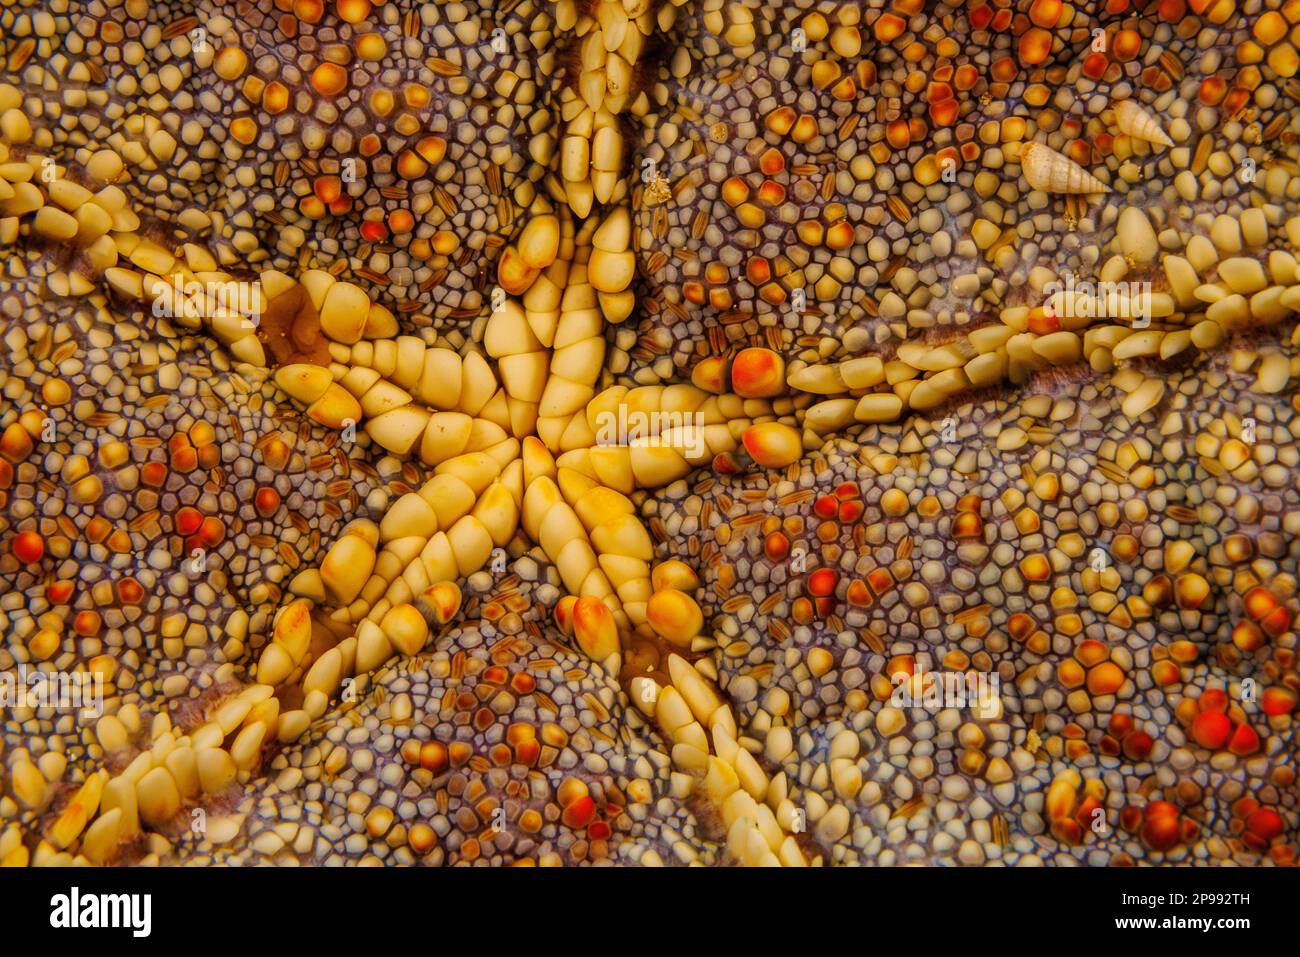 Two snails in the Eulimidae family are attached to the convoluted underside of a cushion starfish, Culcita novaeguineae, Hawaii. Stock Photo